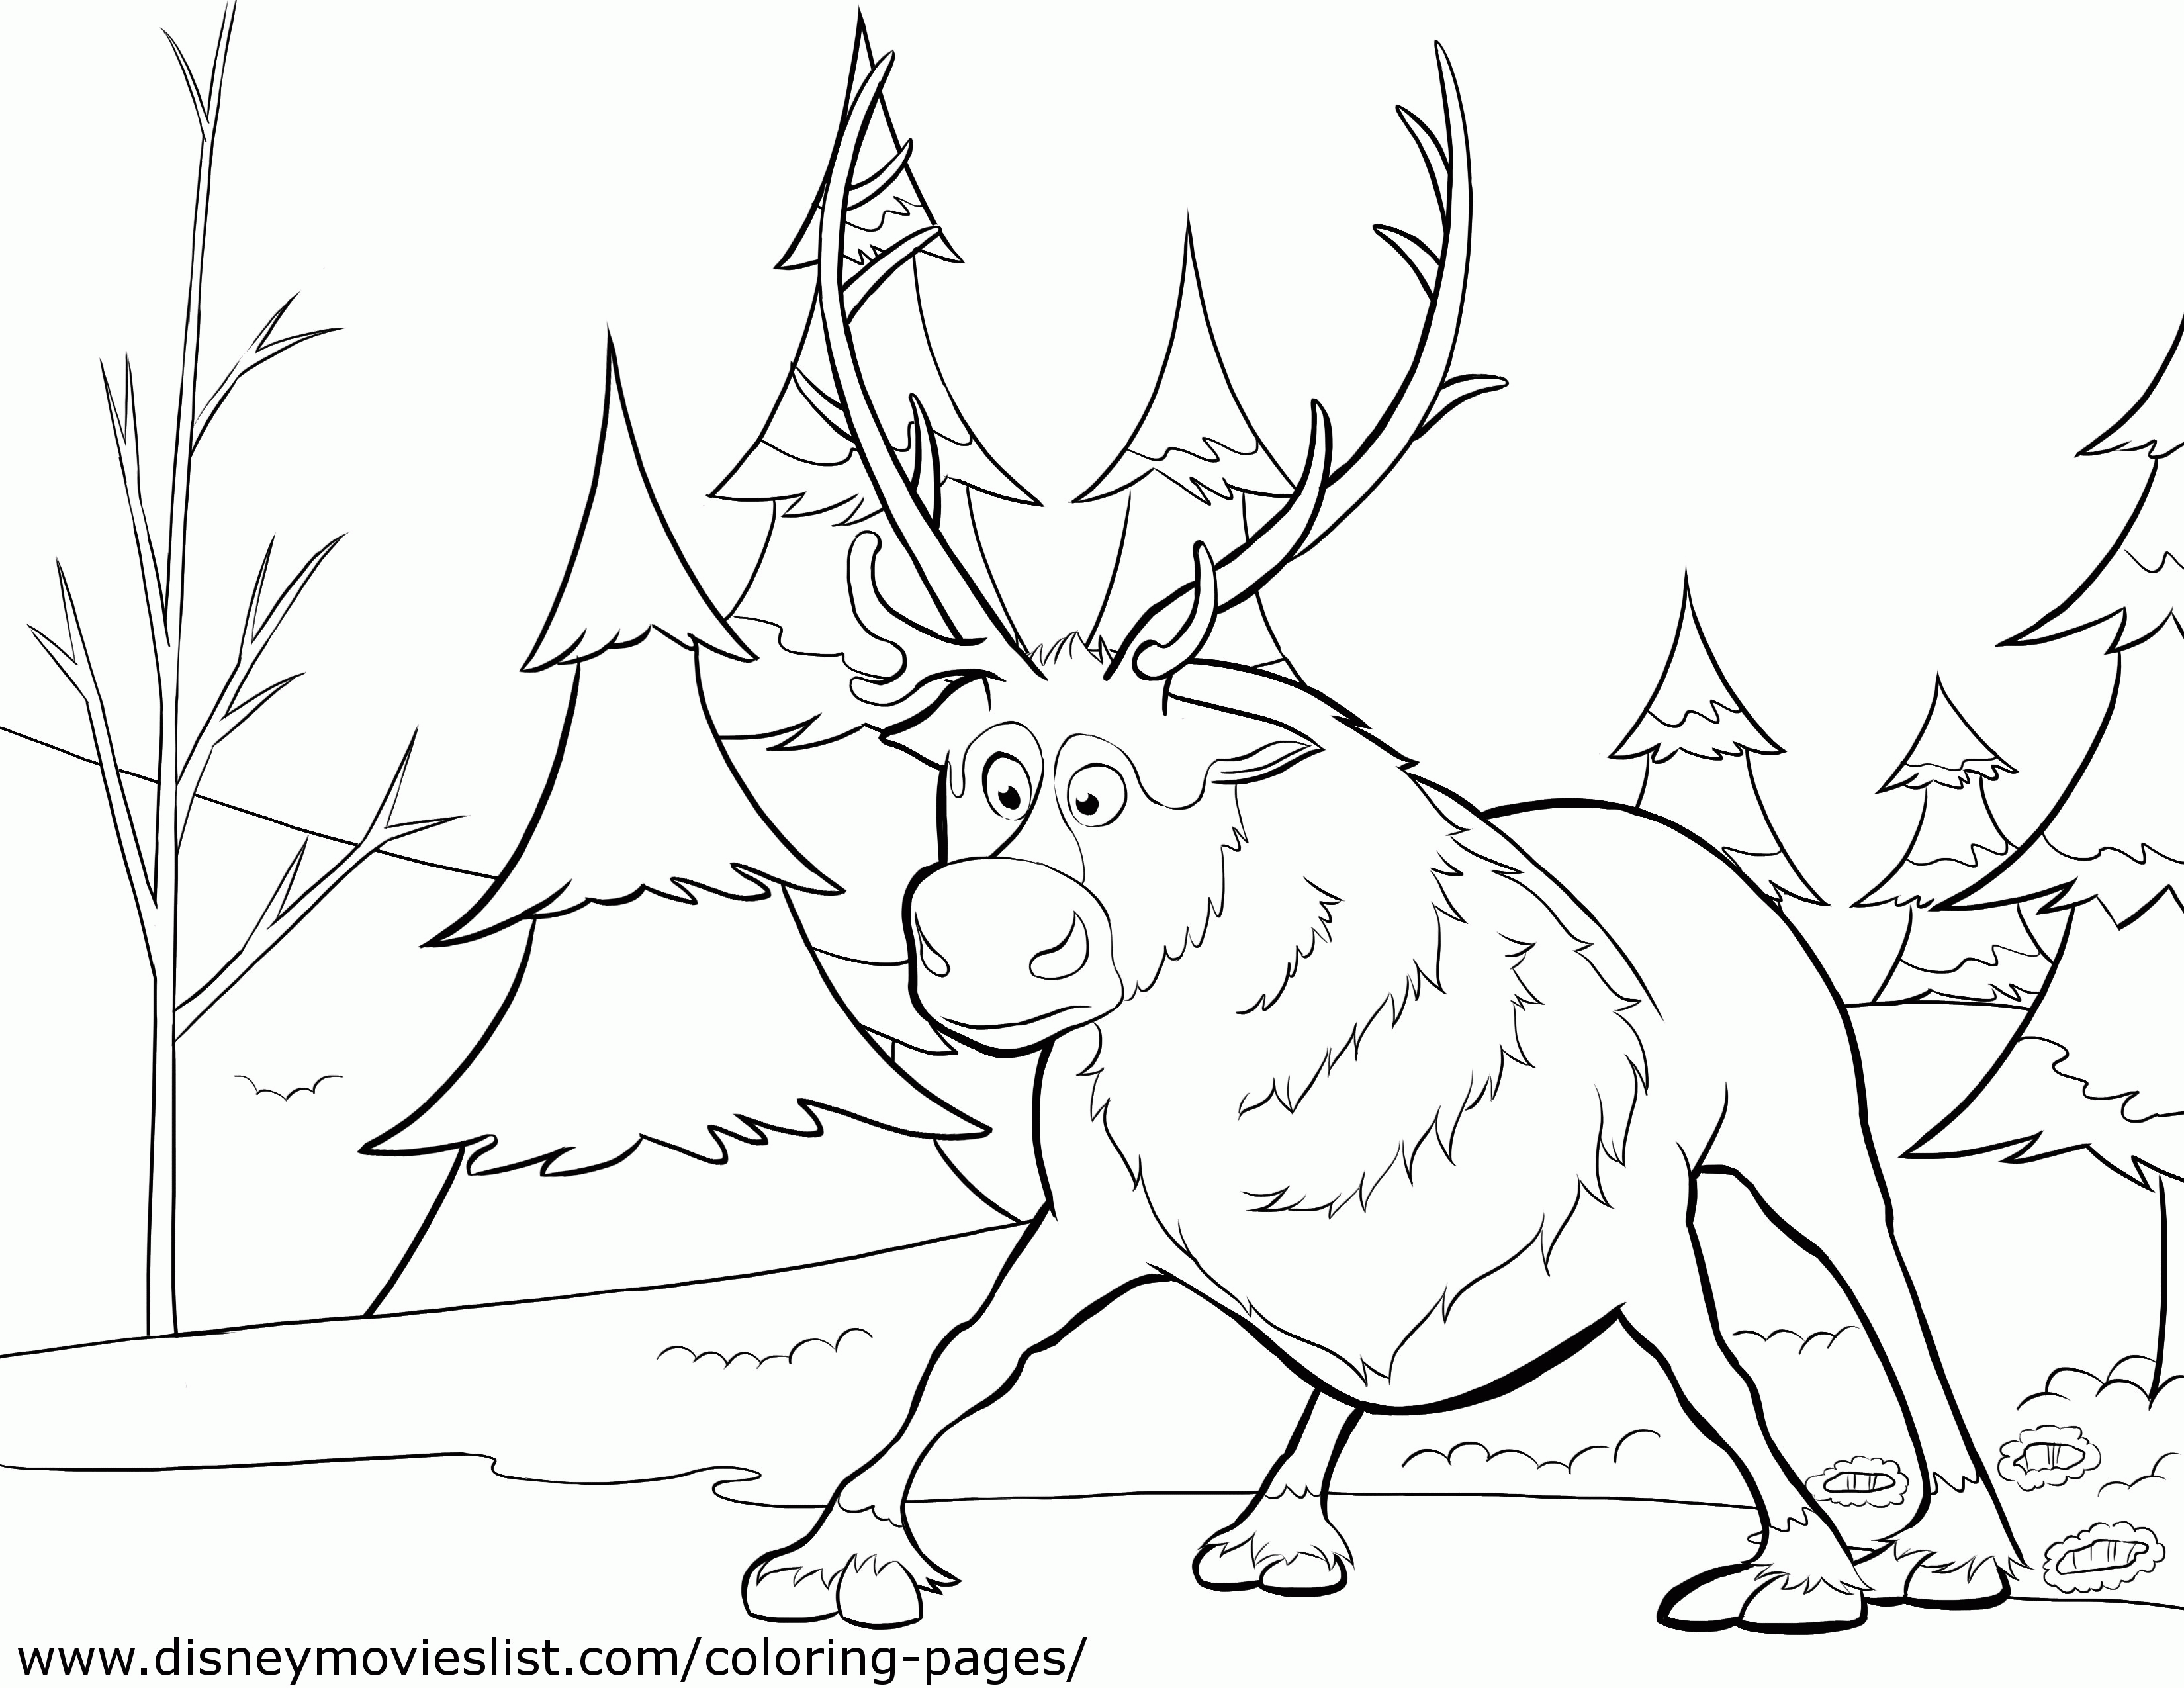 Sven on Ice - Disney's Frozen Coloring Pages Sheet, Free Disney Printable Frozen